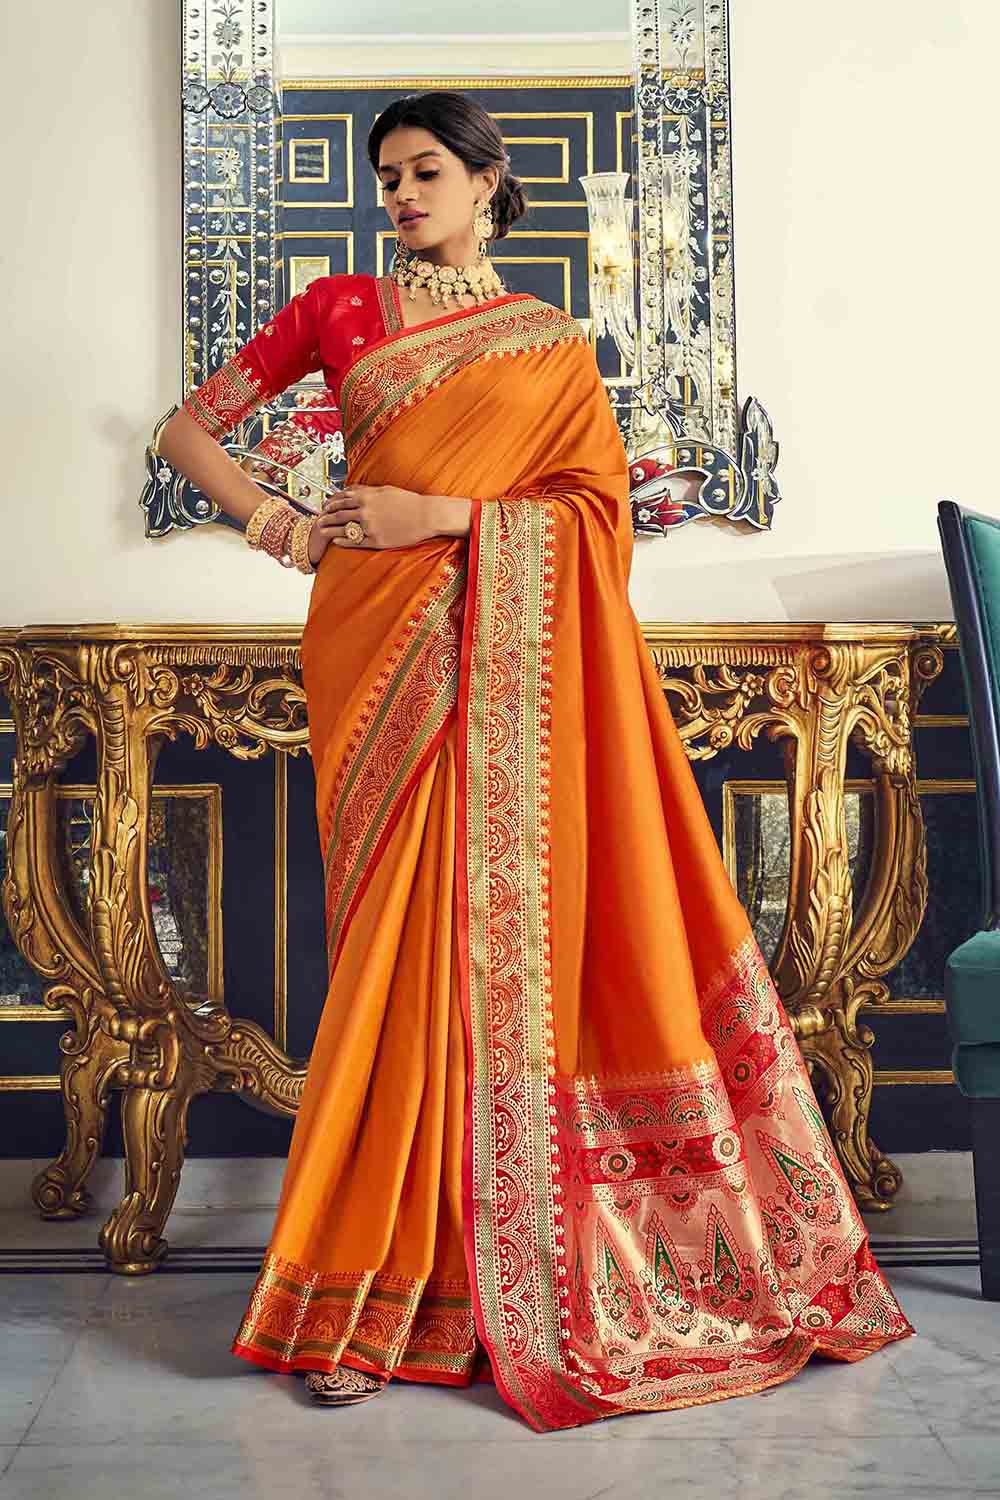 Which colour blouse can go with an orange saree? - Quora